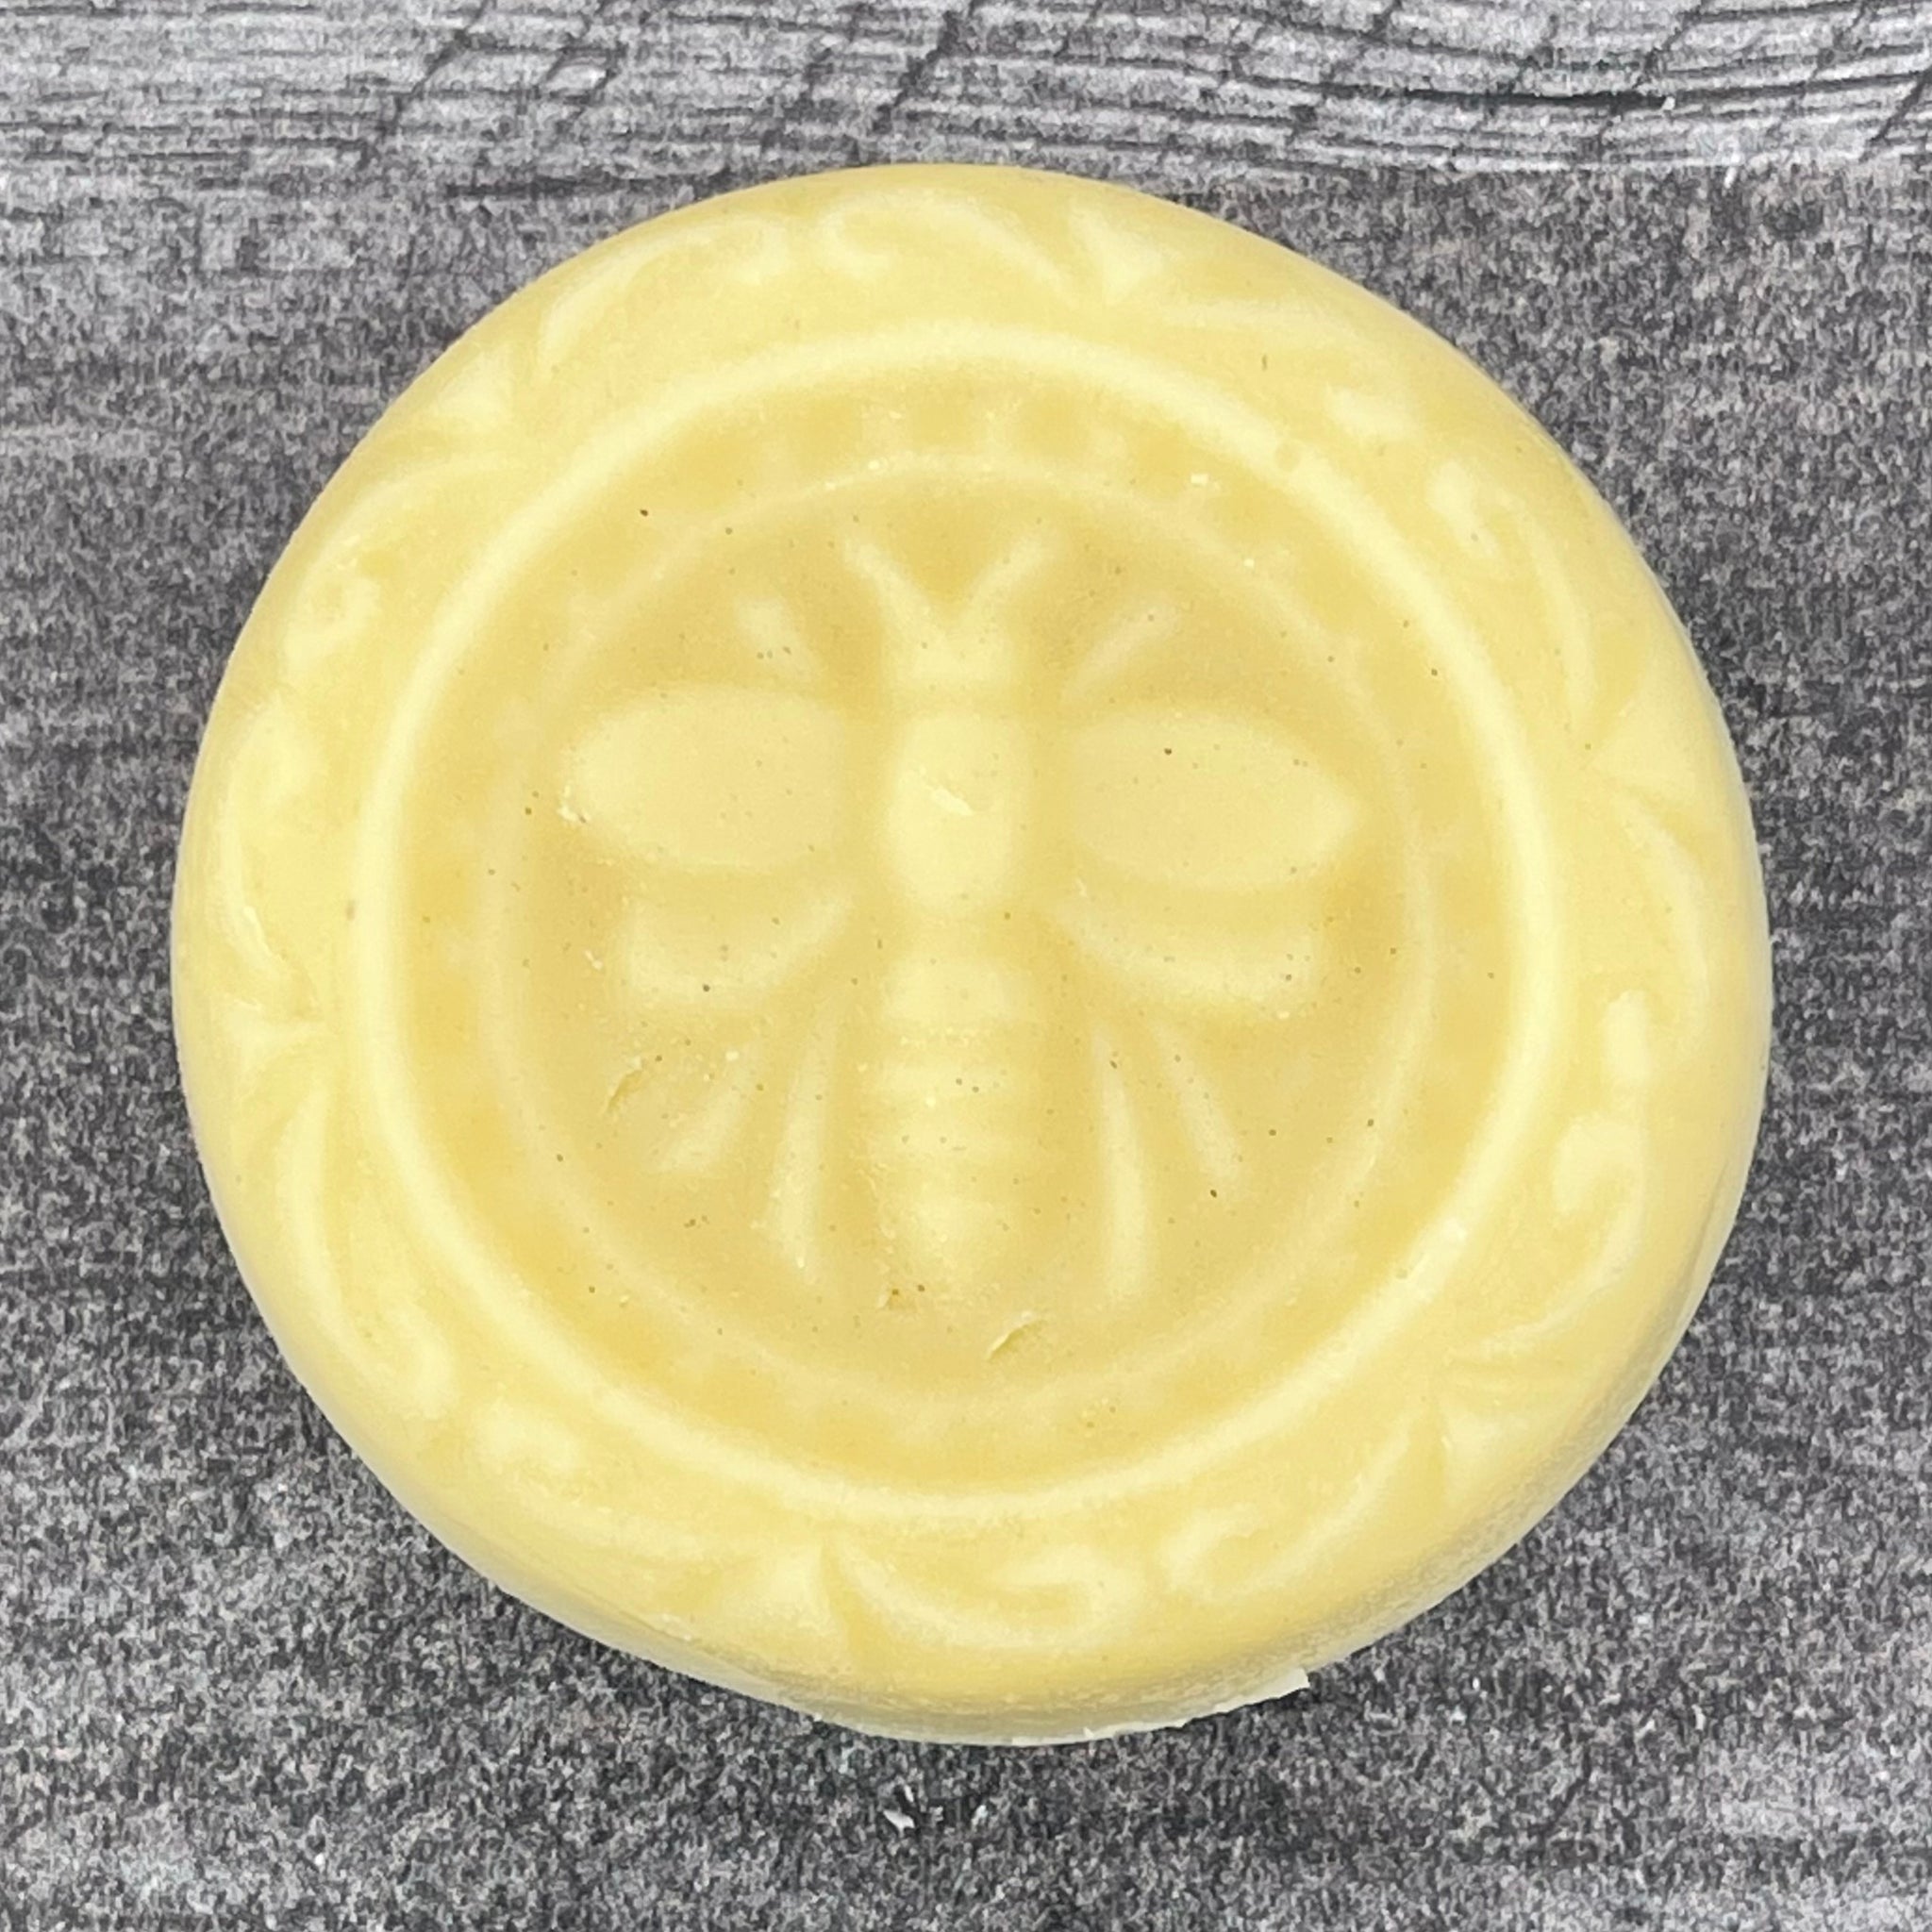 Lotion Bar Unscented